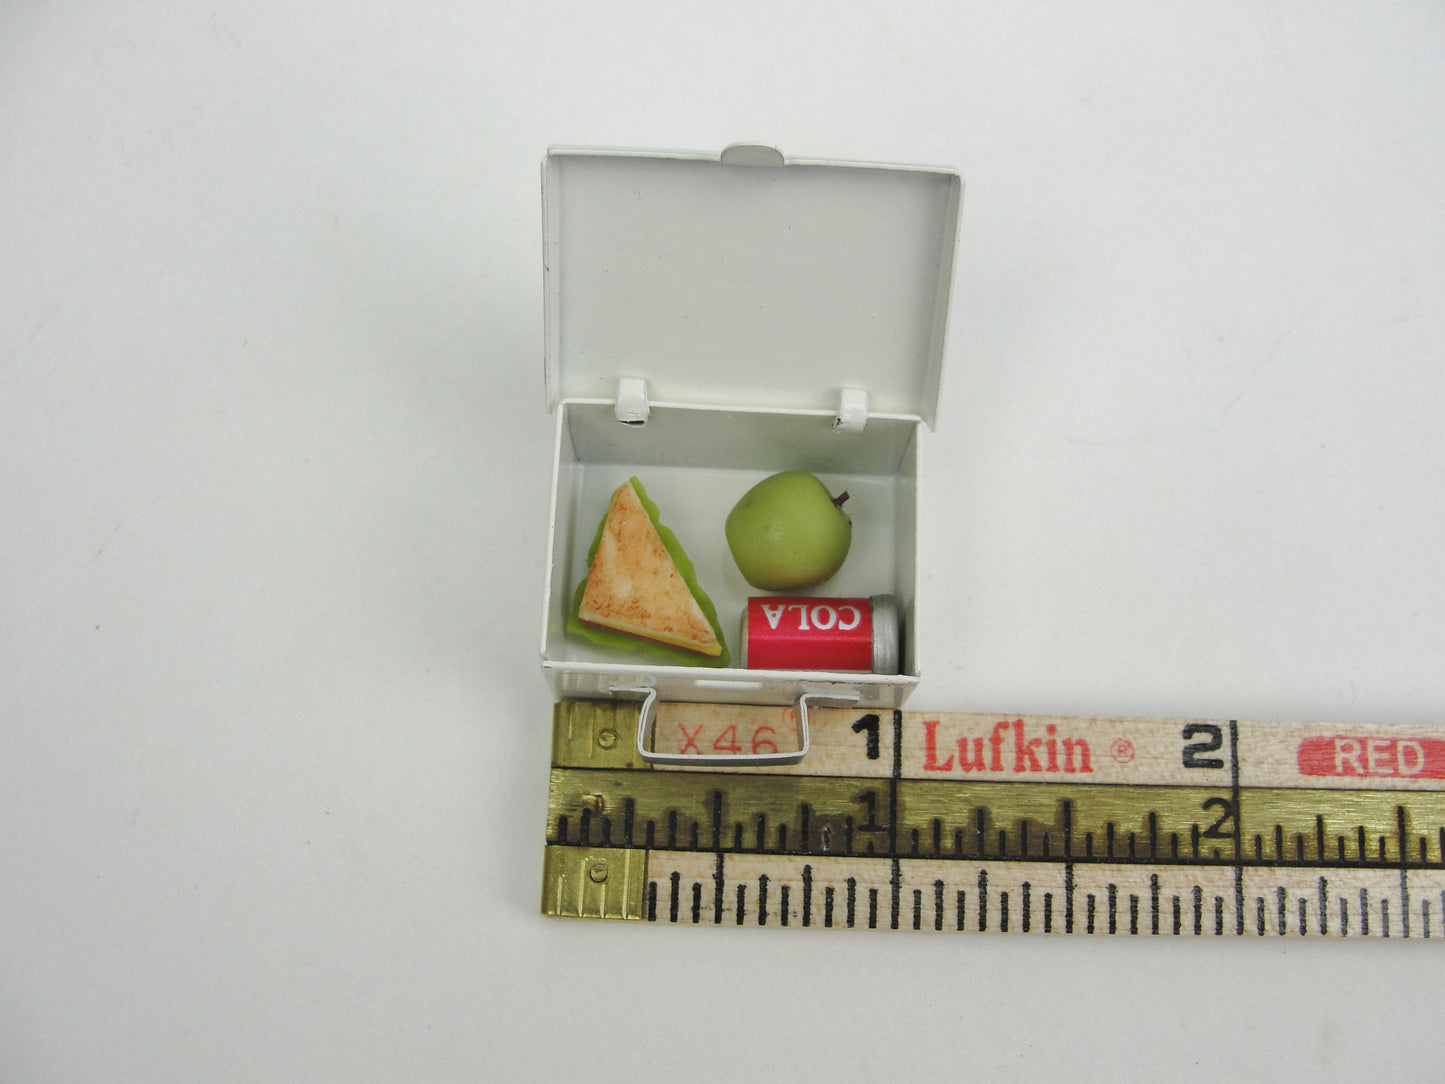 Dollhouse miniature lunchbox and food